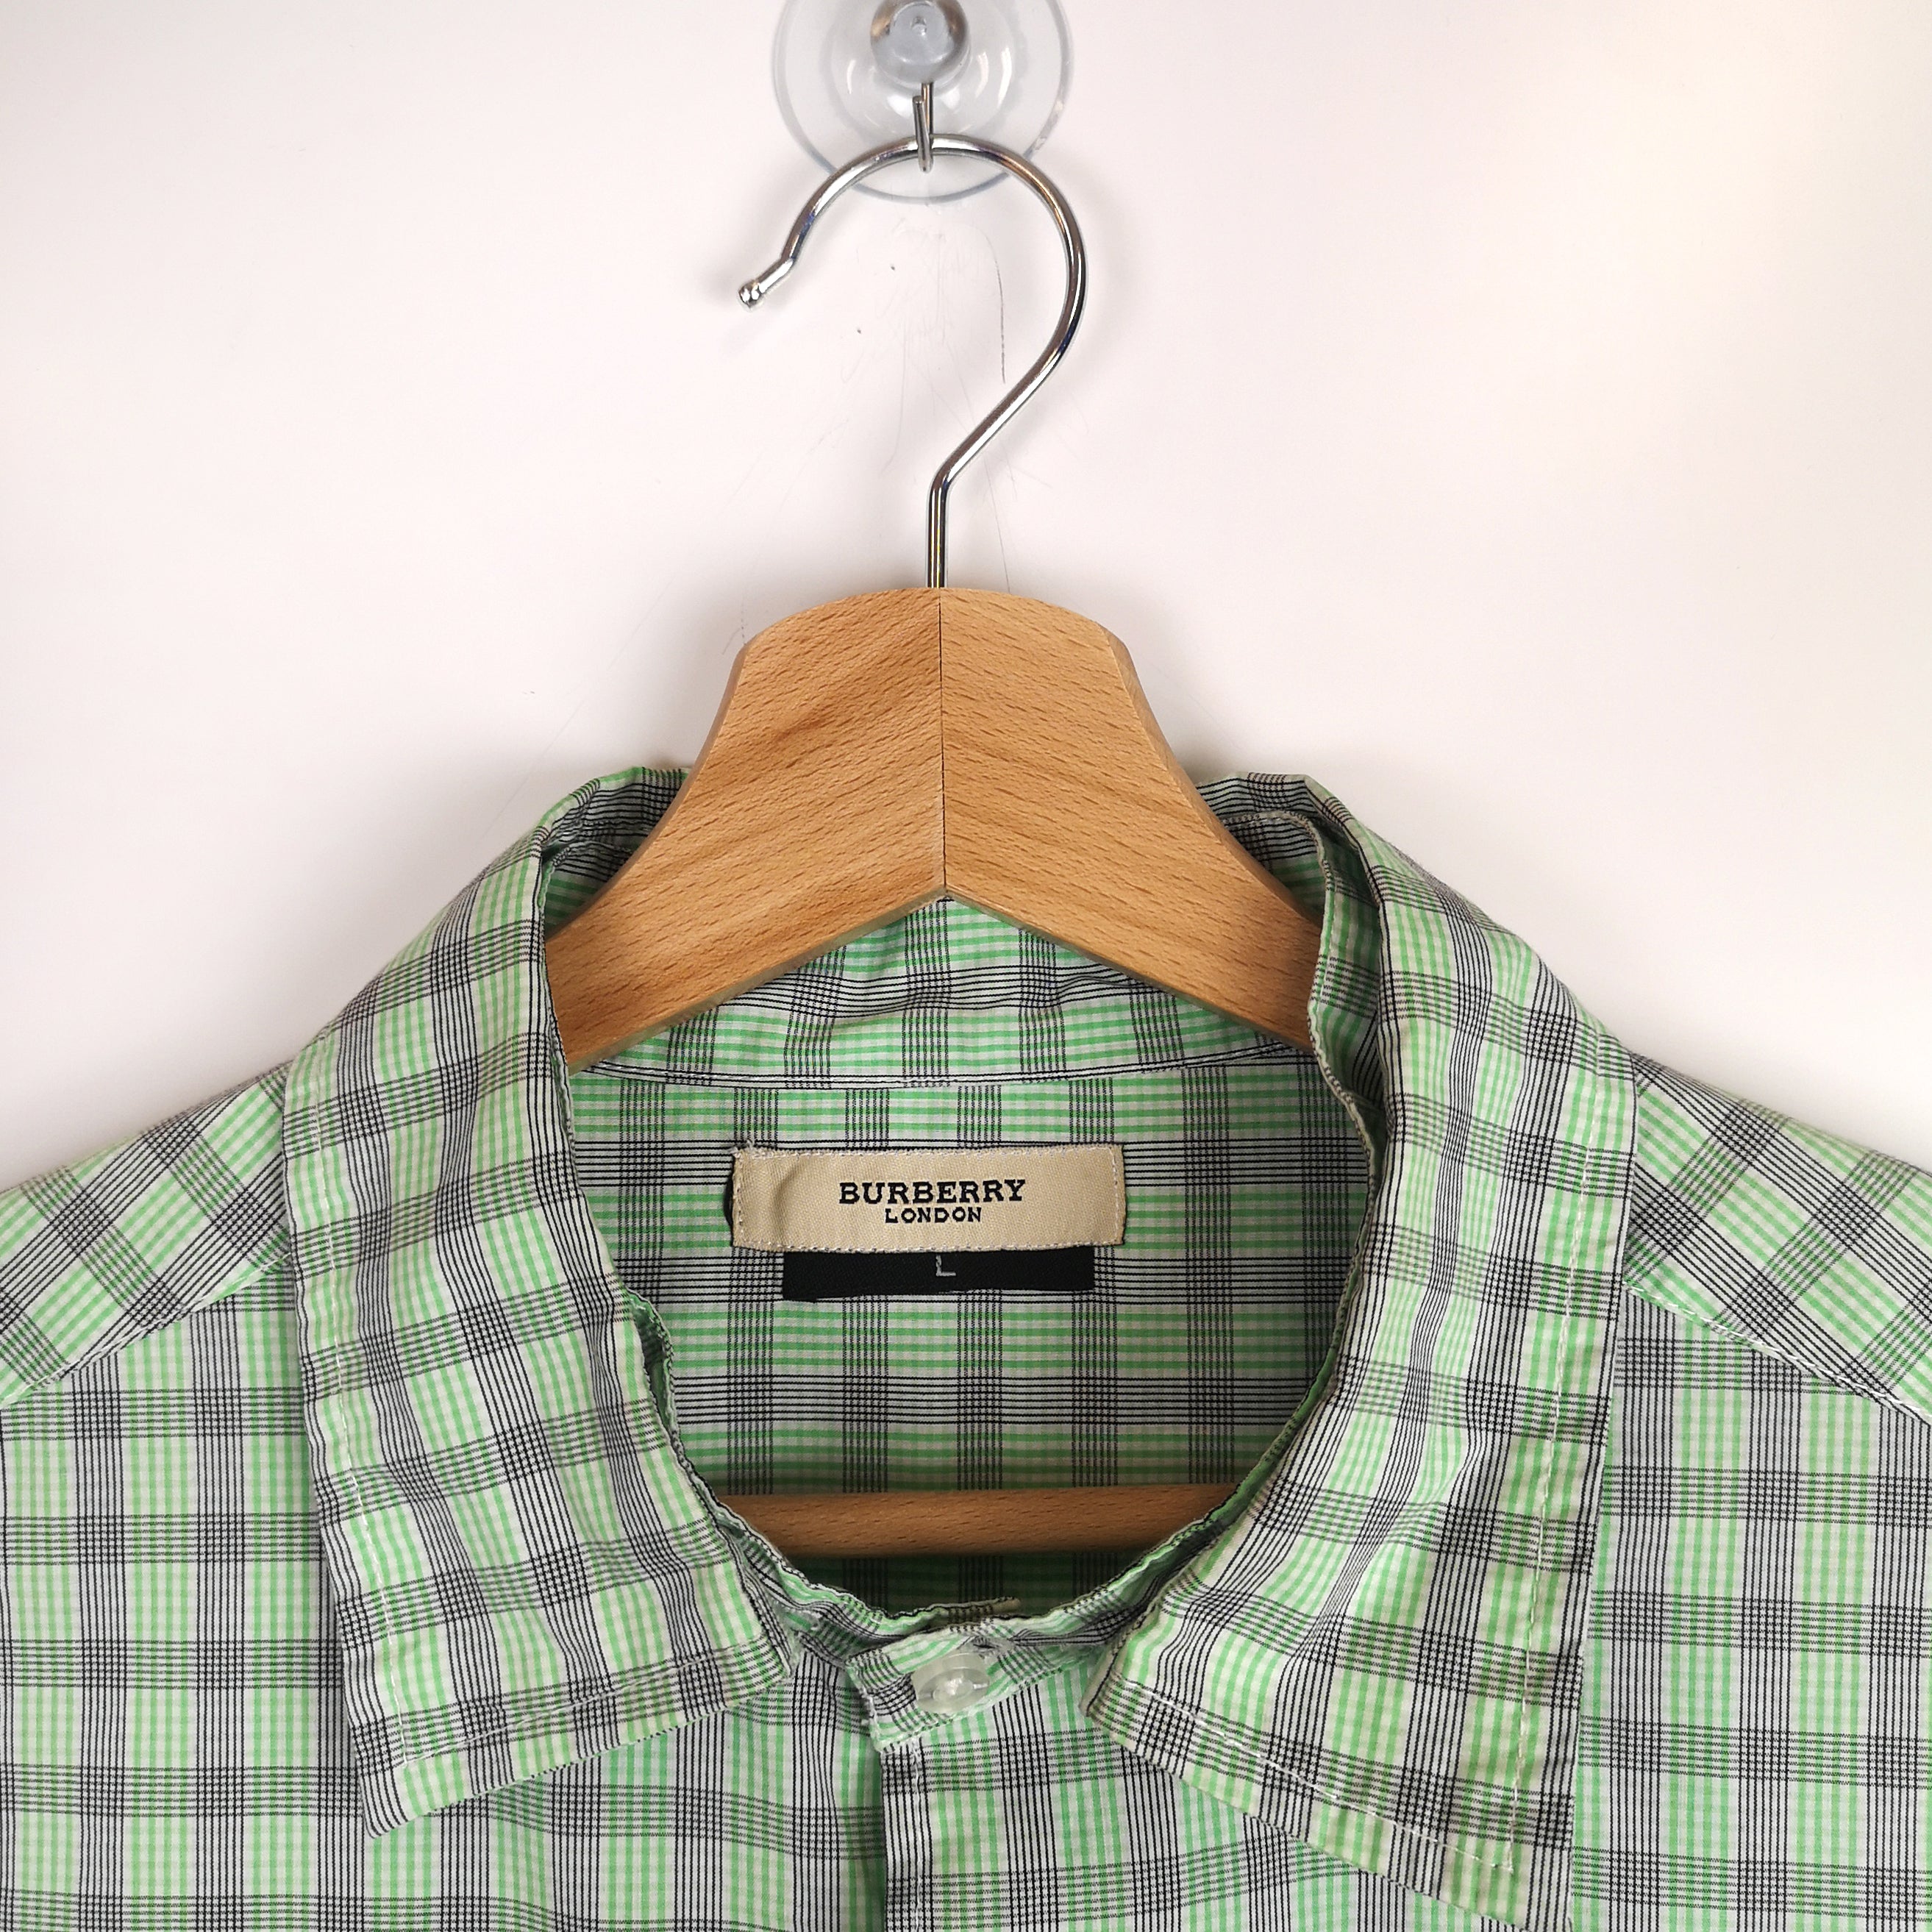 Burberry Short Sleeved Shirt with Detachable Collar